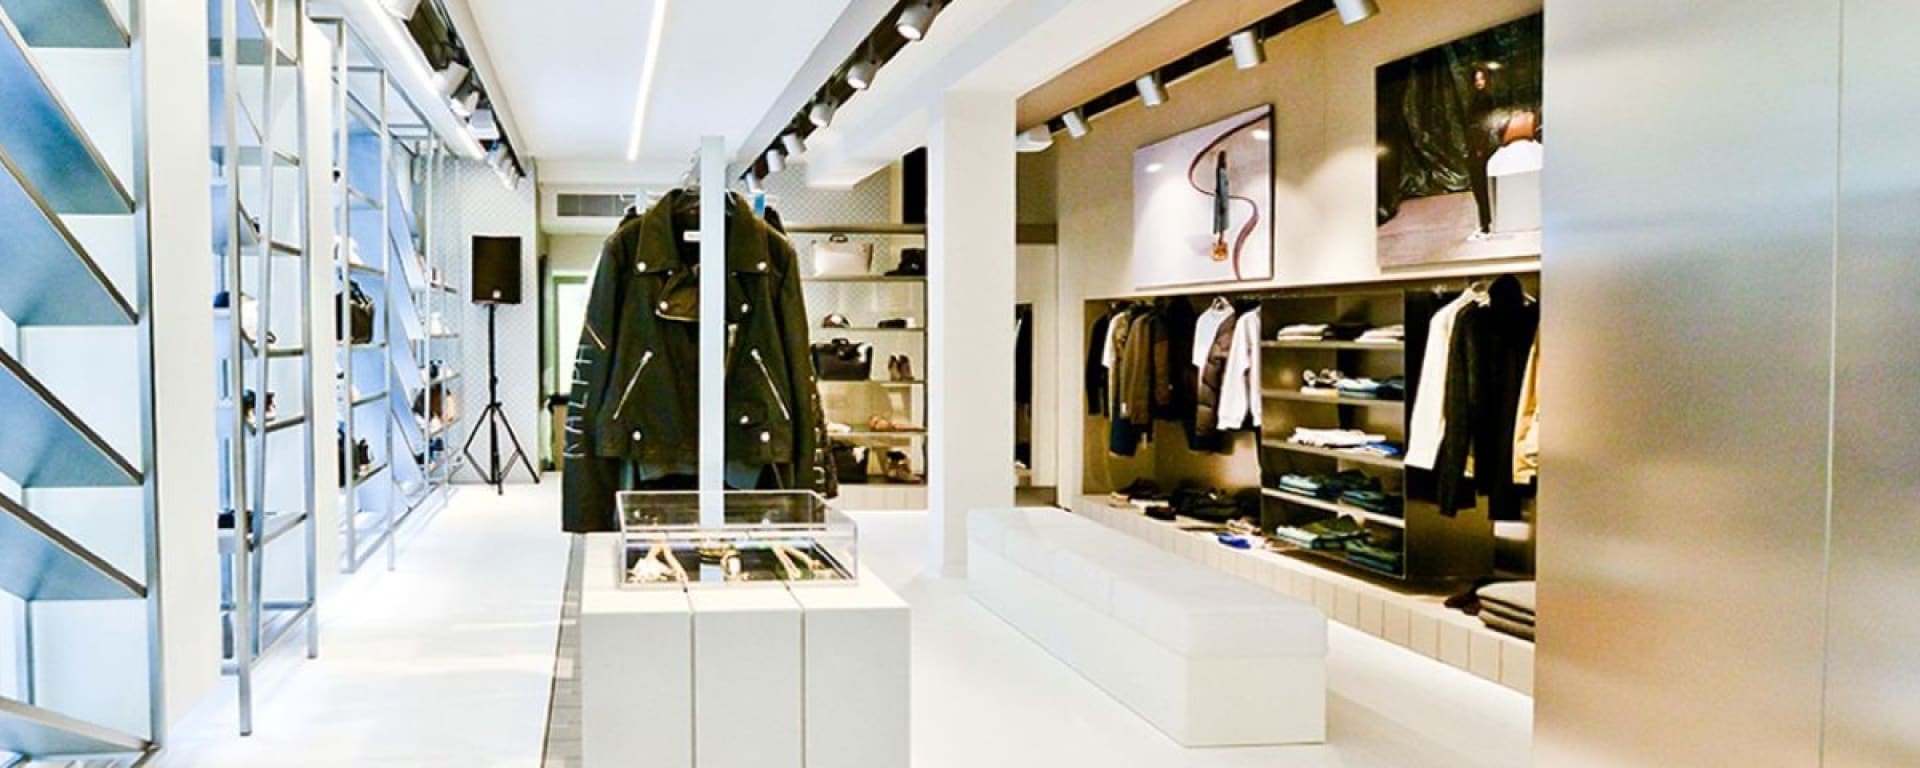 Golden Goose AMSTERDAM FLAGSHIP STORE 1 of 1